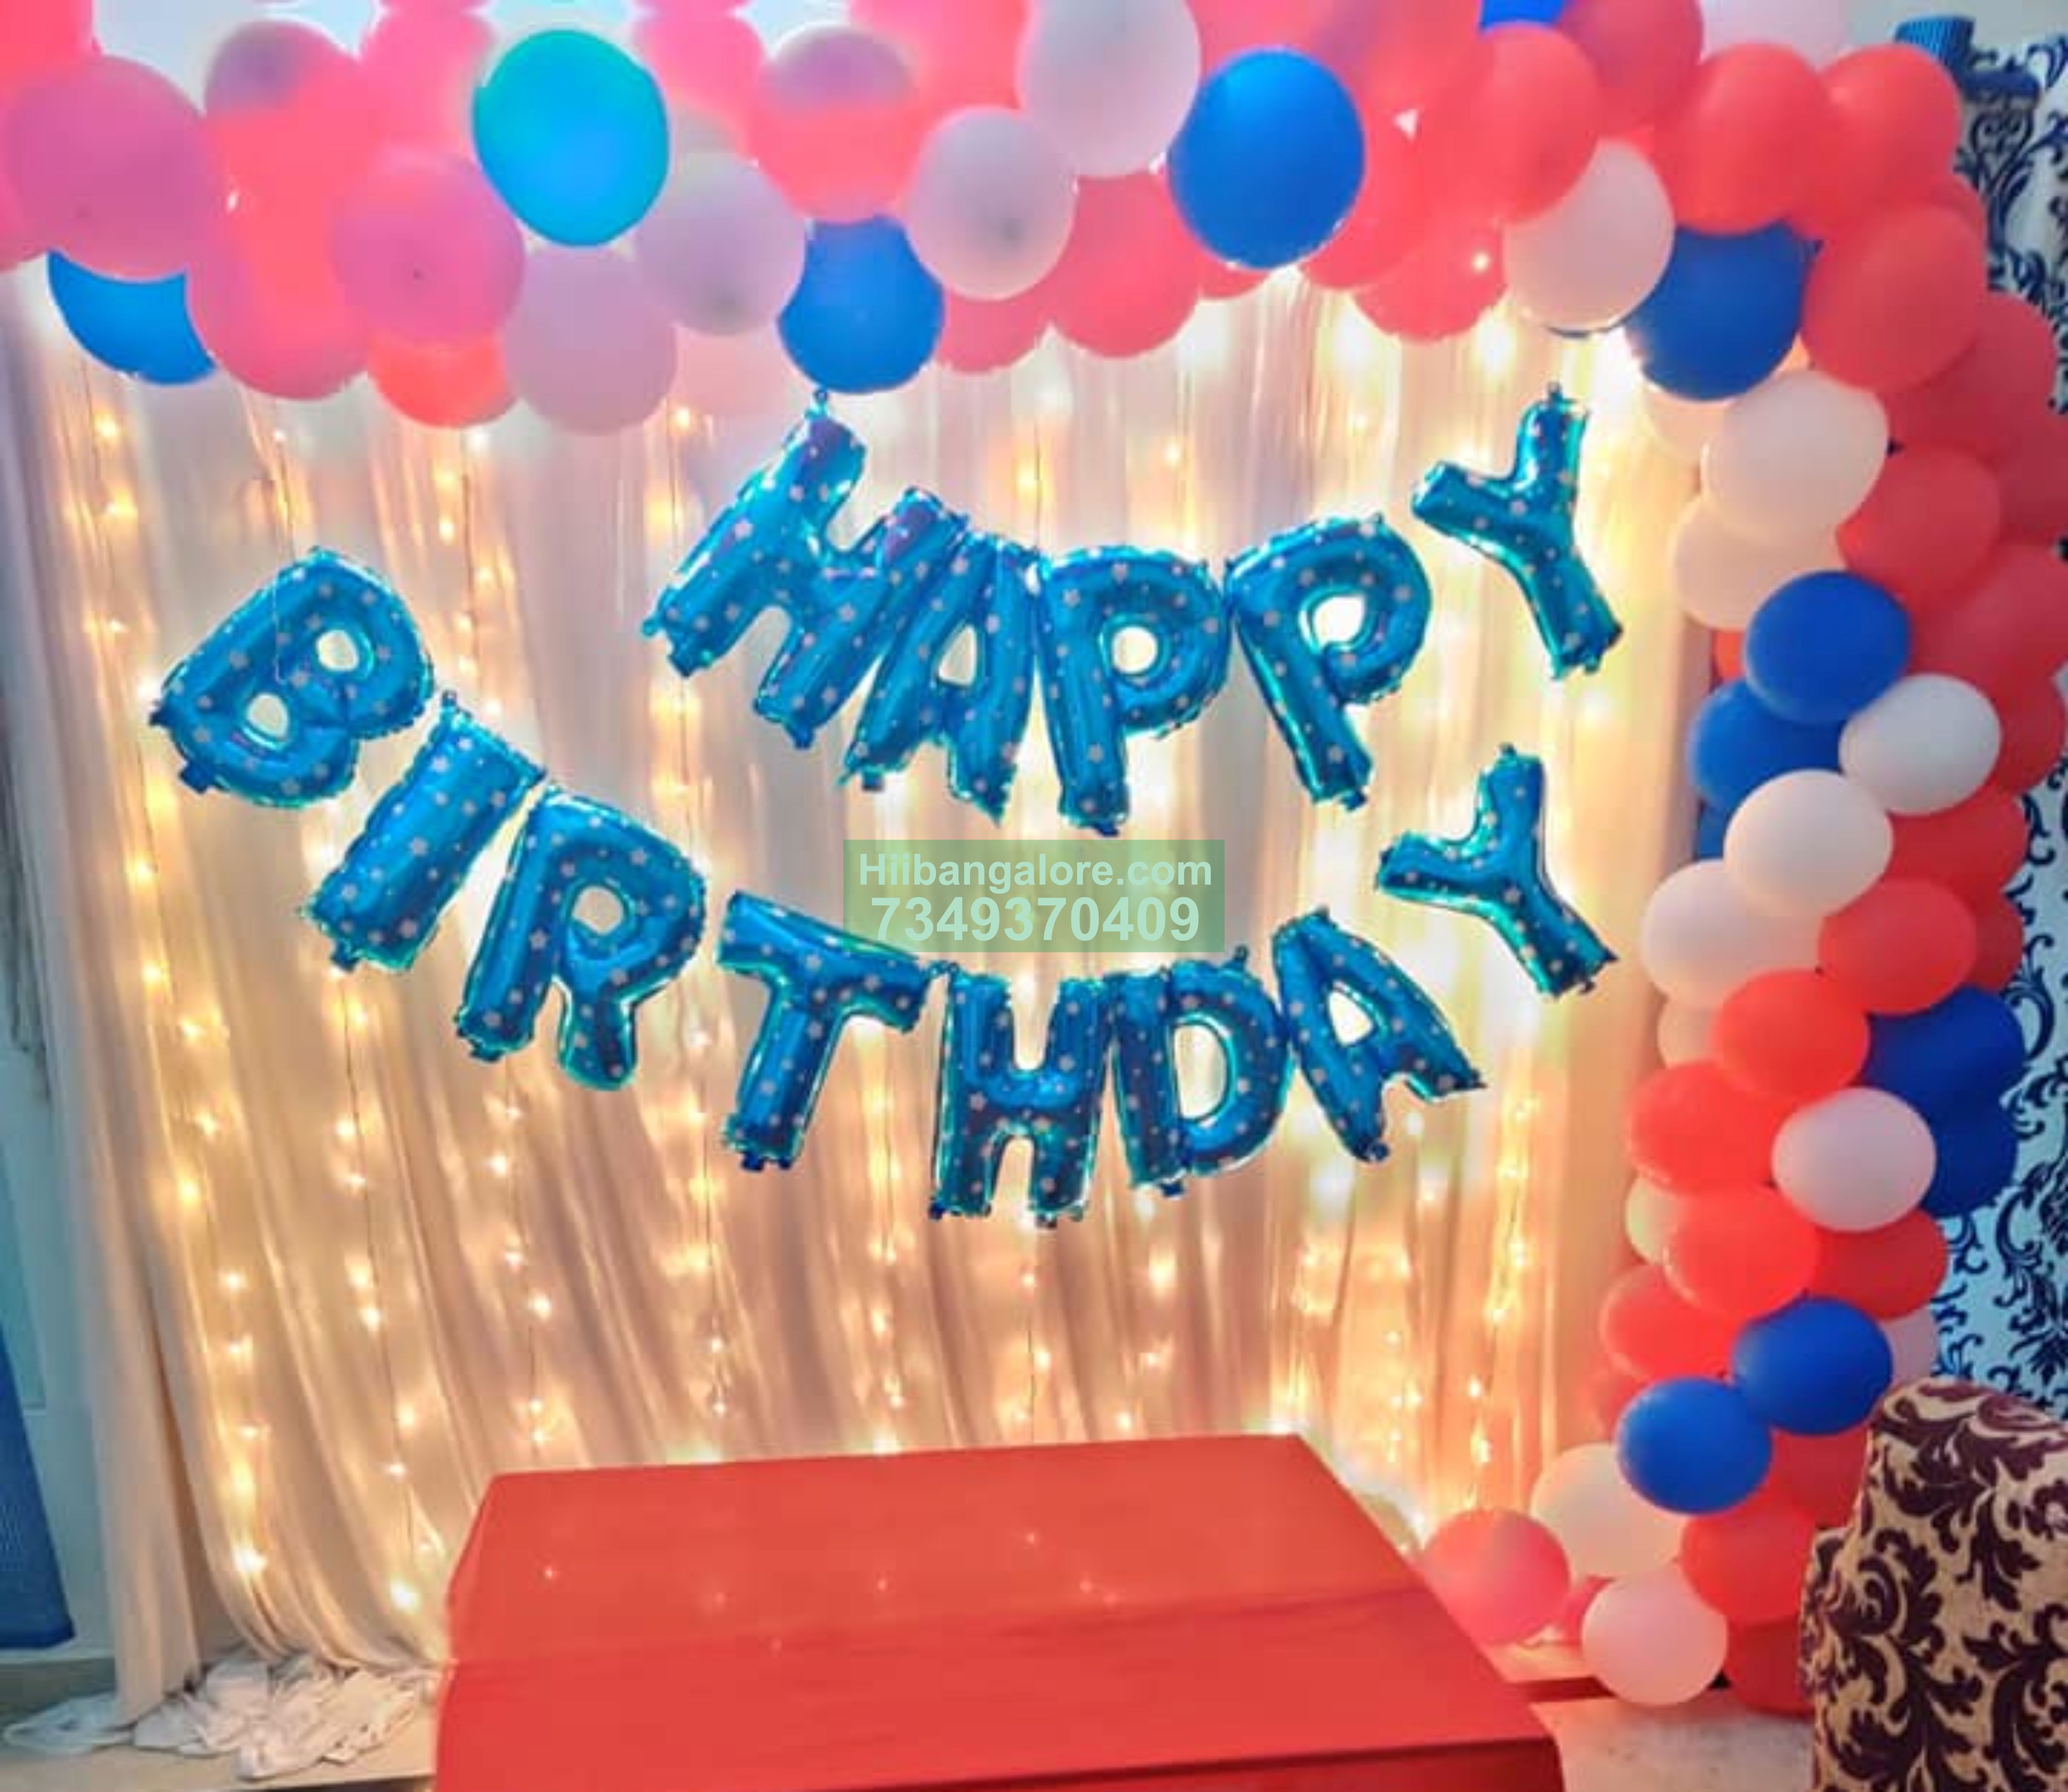 simple home birthday foil balloon decoration - Catering services ...